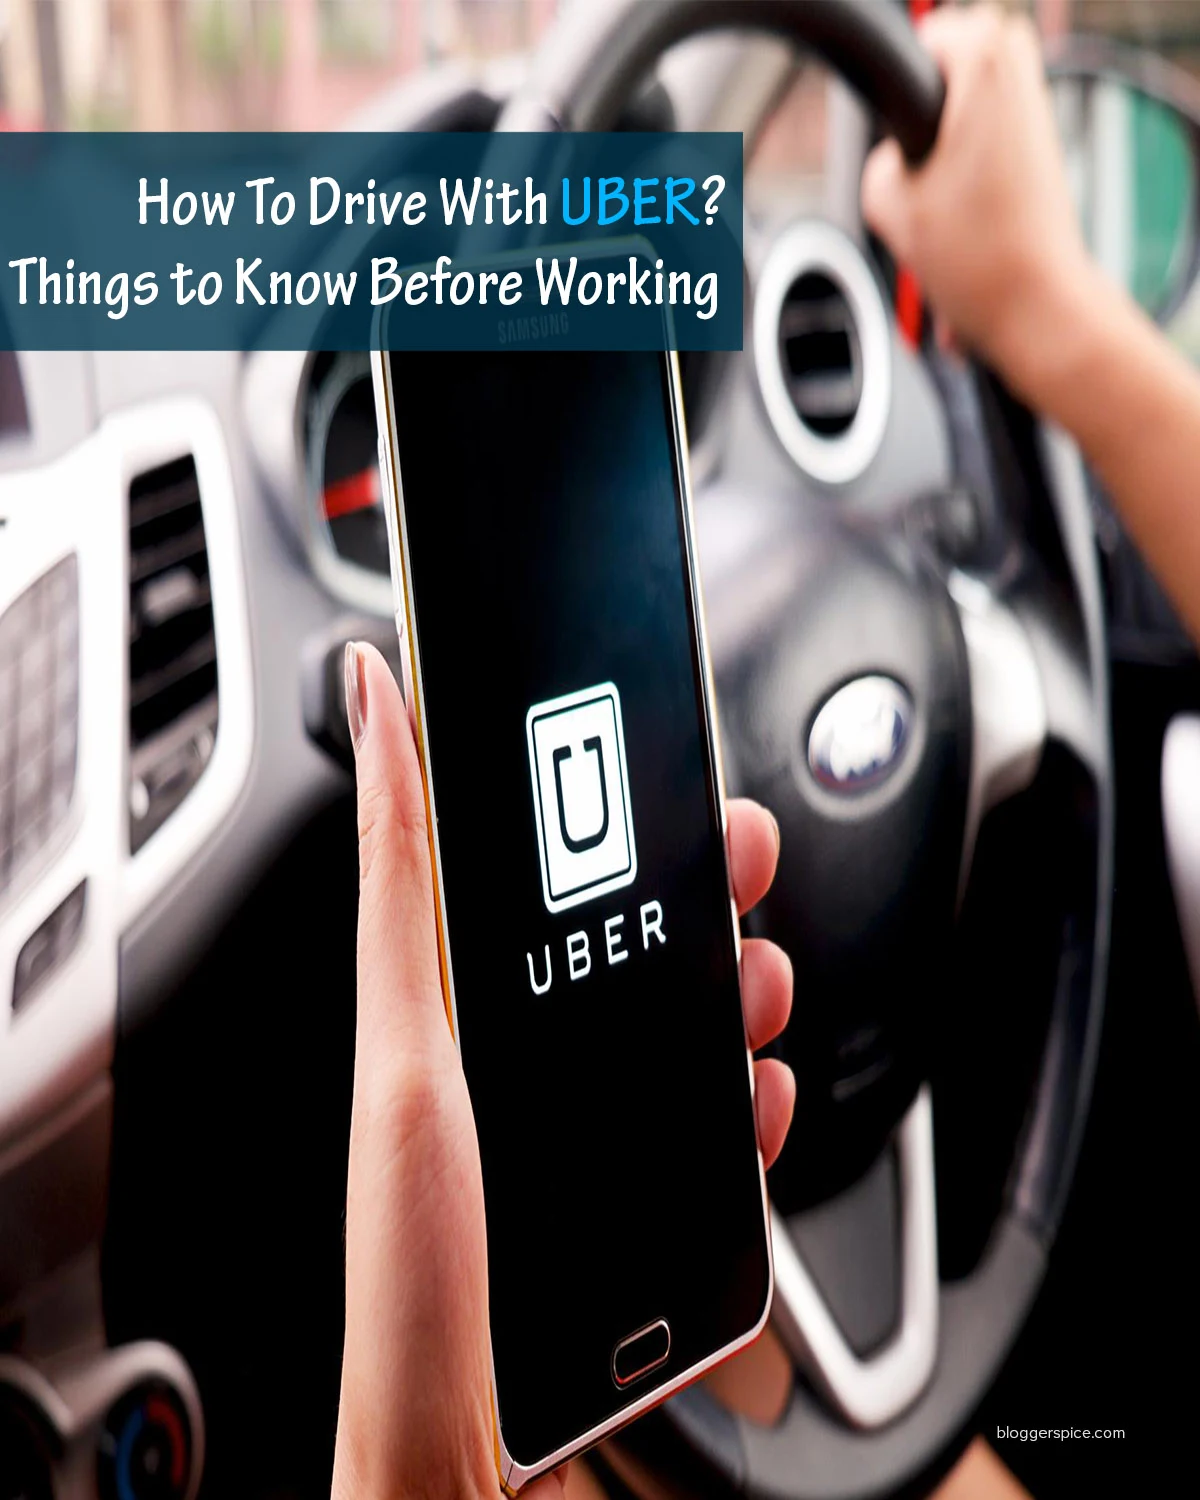 How To Drive With Uber?